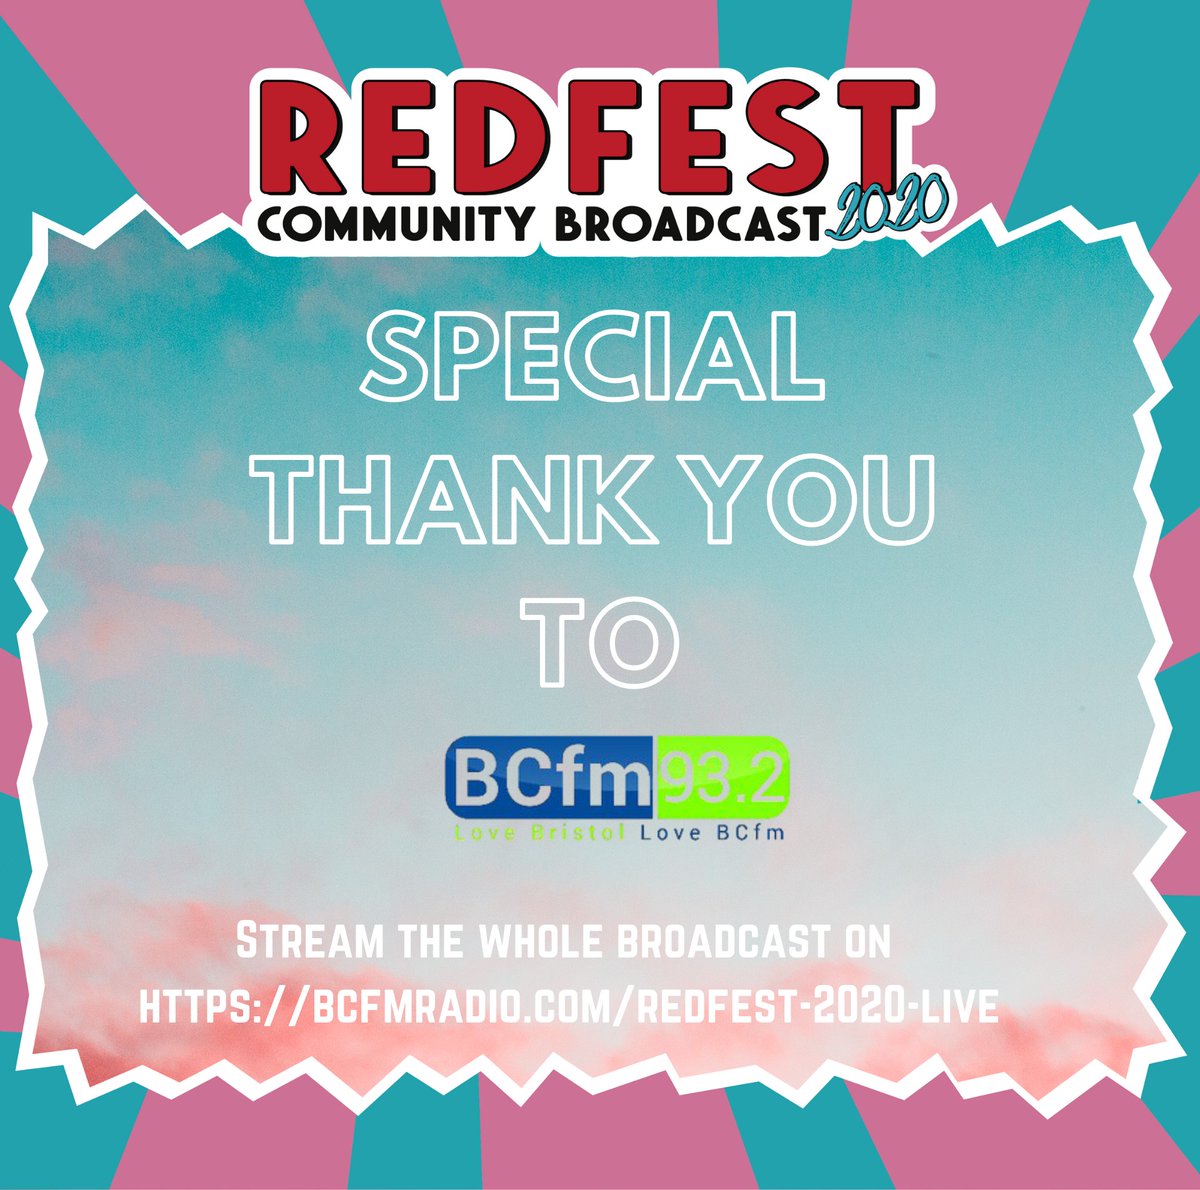 😍😎🎤SPECIAL THANK YOU 😍😎🎤 to @BCfmRadio for hosting the Redfest 2020 broadcast last night! If you missed it - don't worry, you can re-live ALL of our mammoth 13 hour set by the hour, on the BCfm Radio homepage. ⬇️⬇️⬇️⬇️ bcfmradio.com/redfest-2020-l…